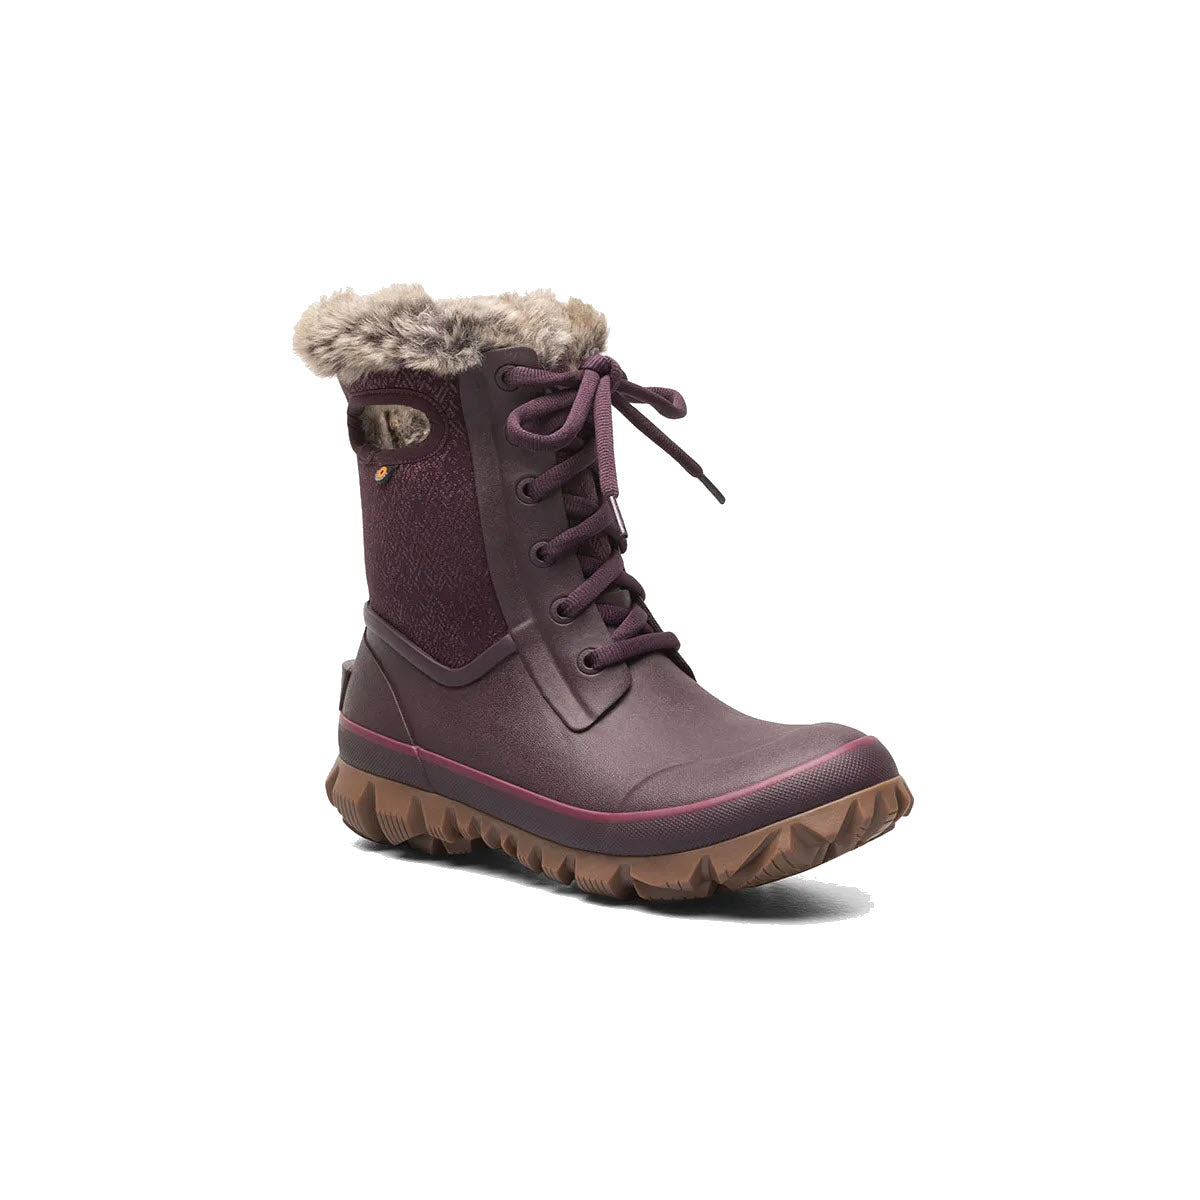 A single plum-colored Bogs Arcata Faded Wine winter boot with fur-lined interior and thick rubber sole, featuring front lacing and a loop on the back.